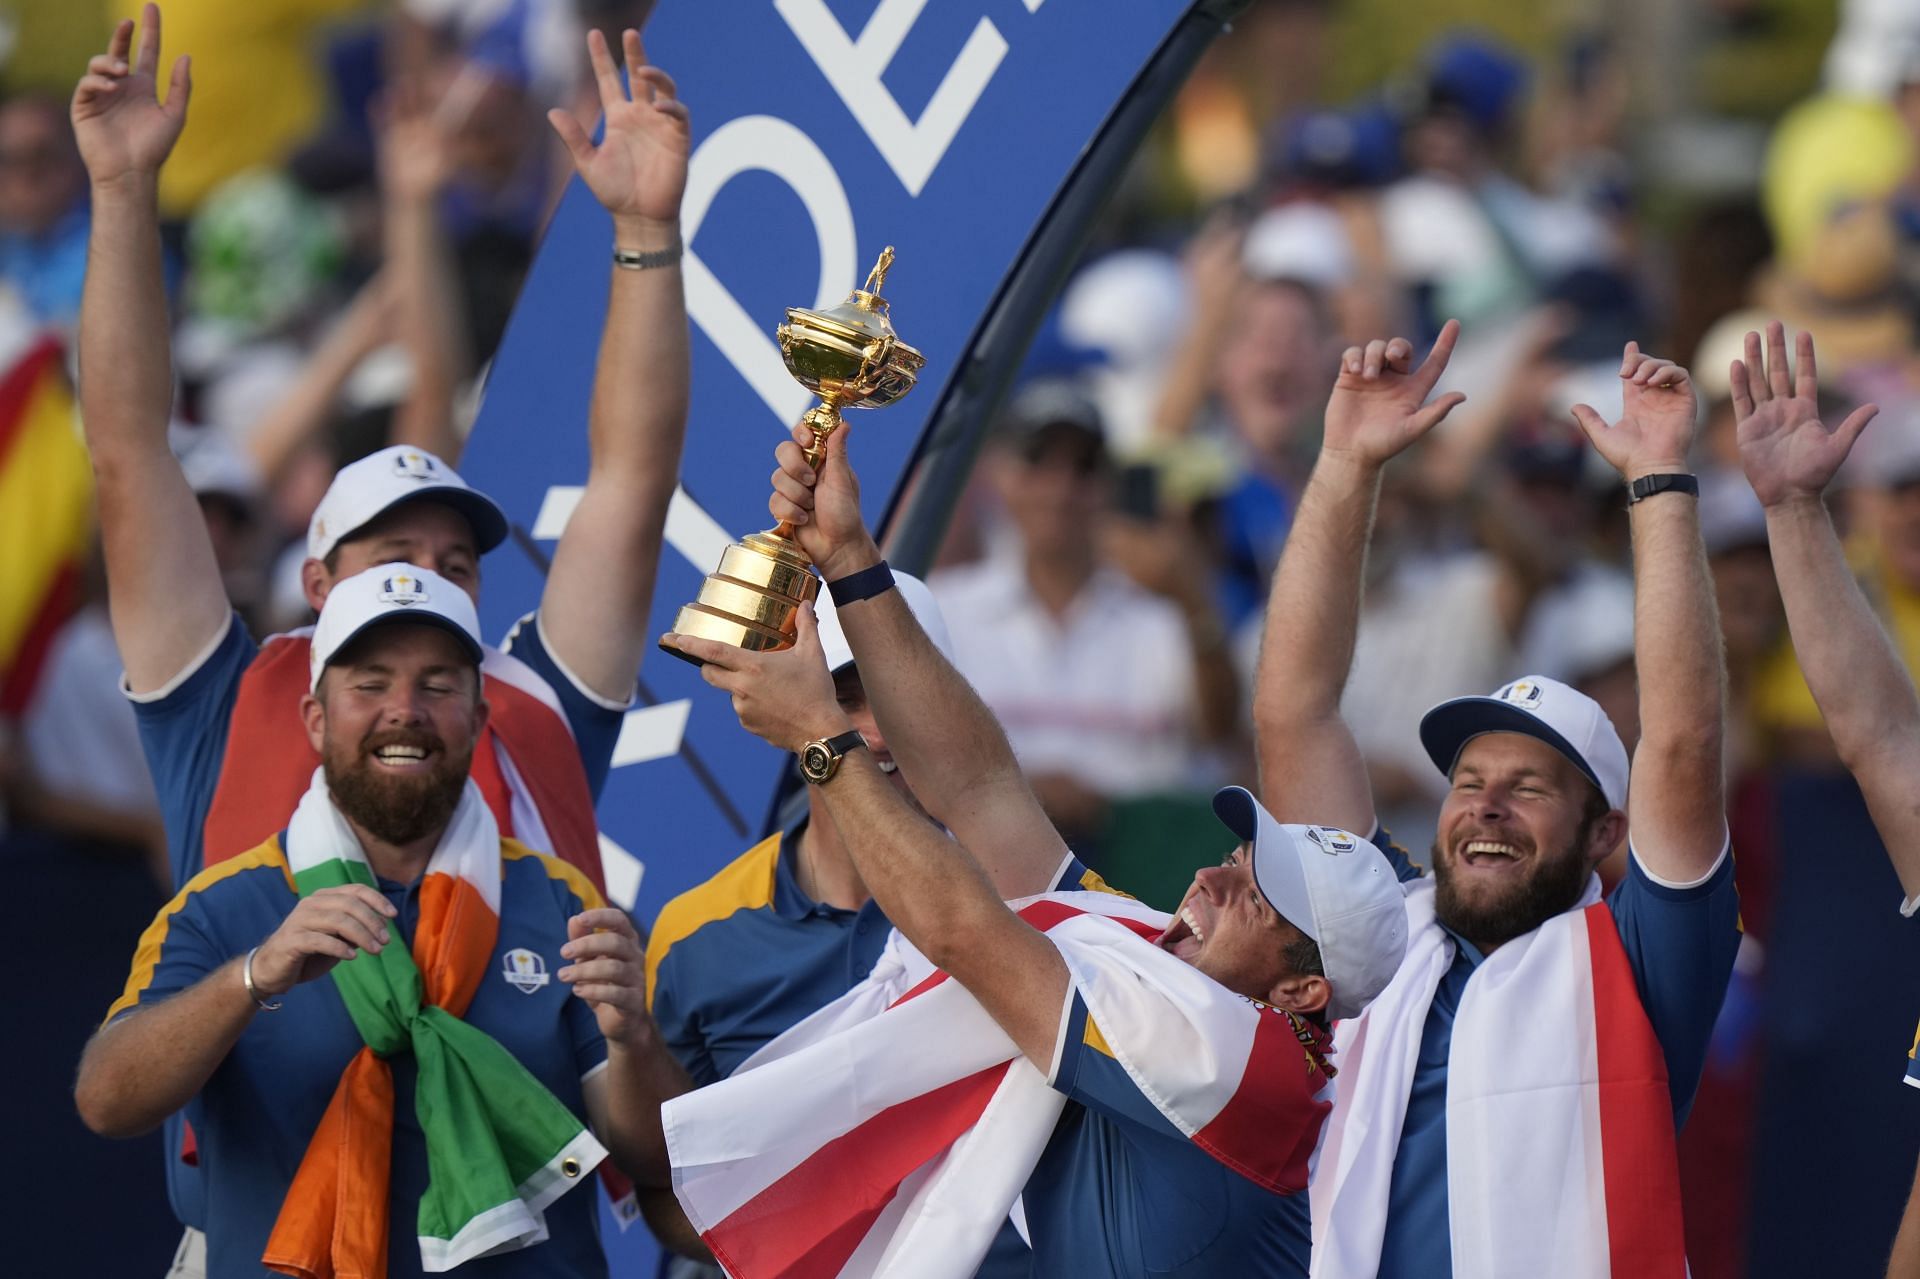 Europe&#039;s Rory McIlroy lifts the Ryder Cup after Europe won the trophy defeating the United States at the Marco Simone Golf Club